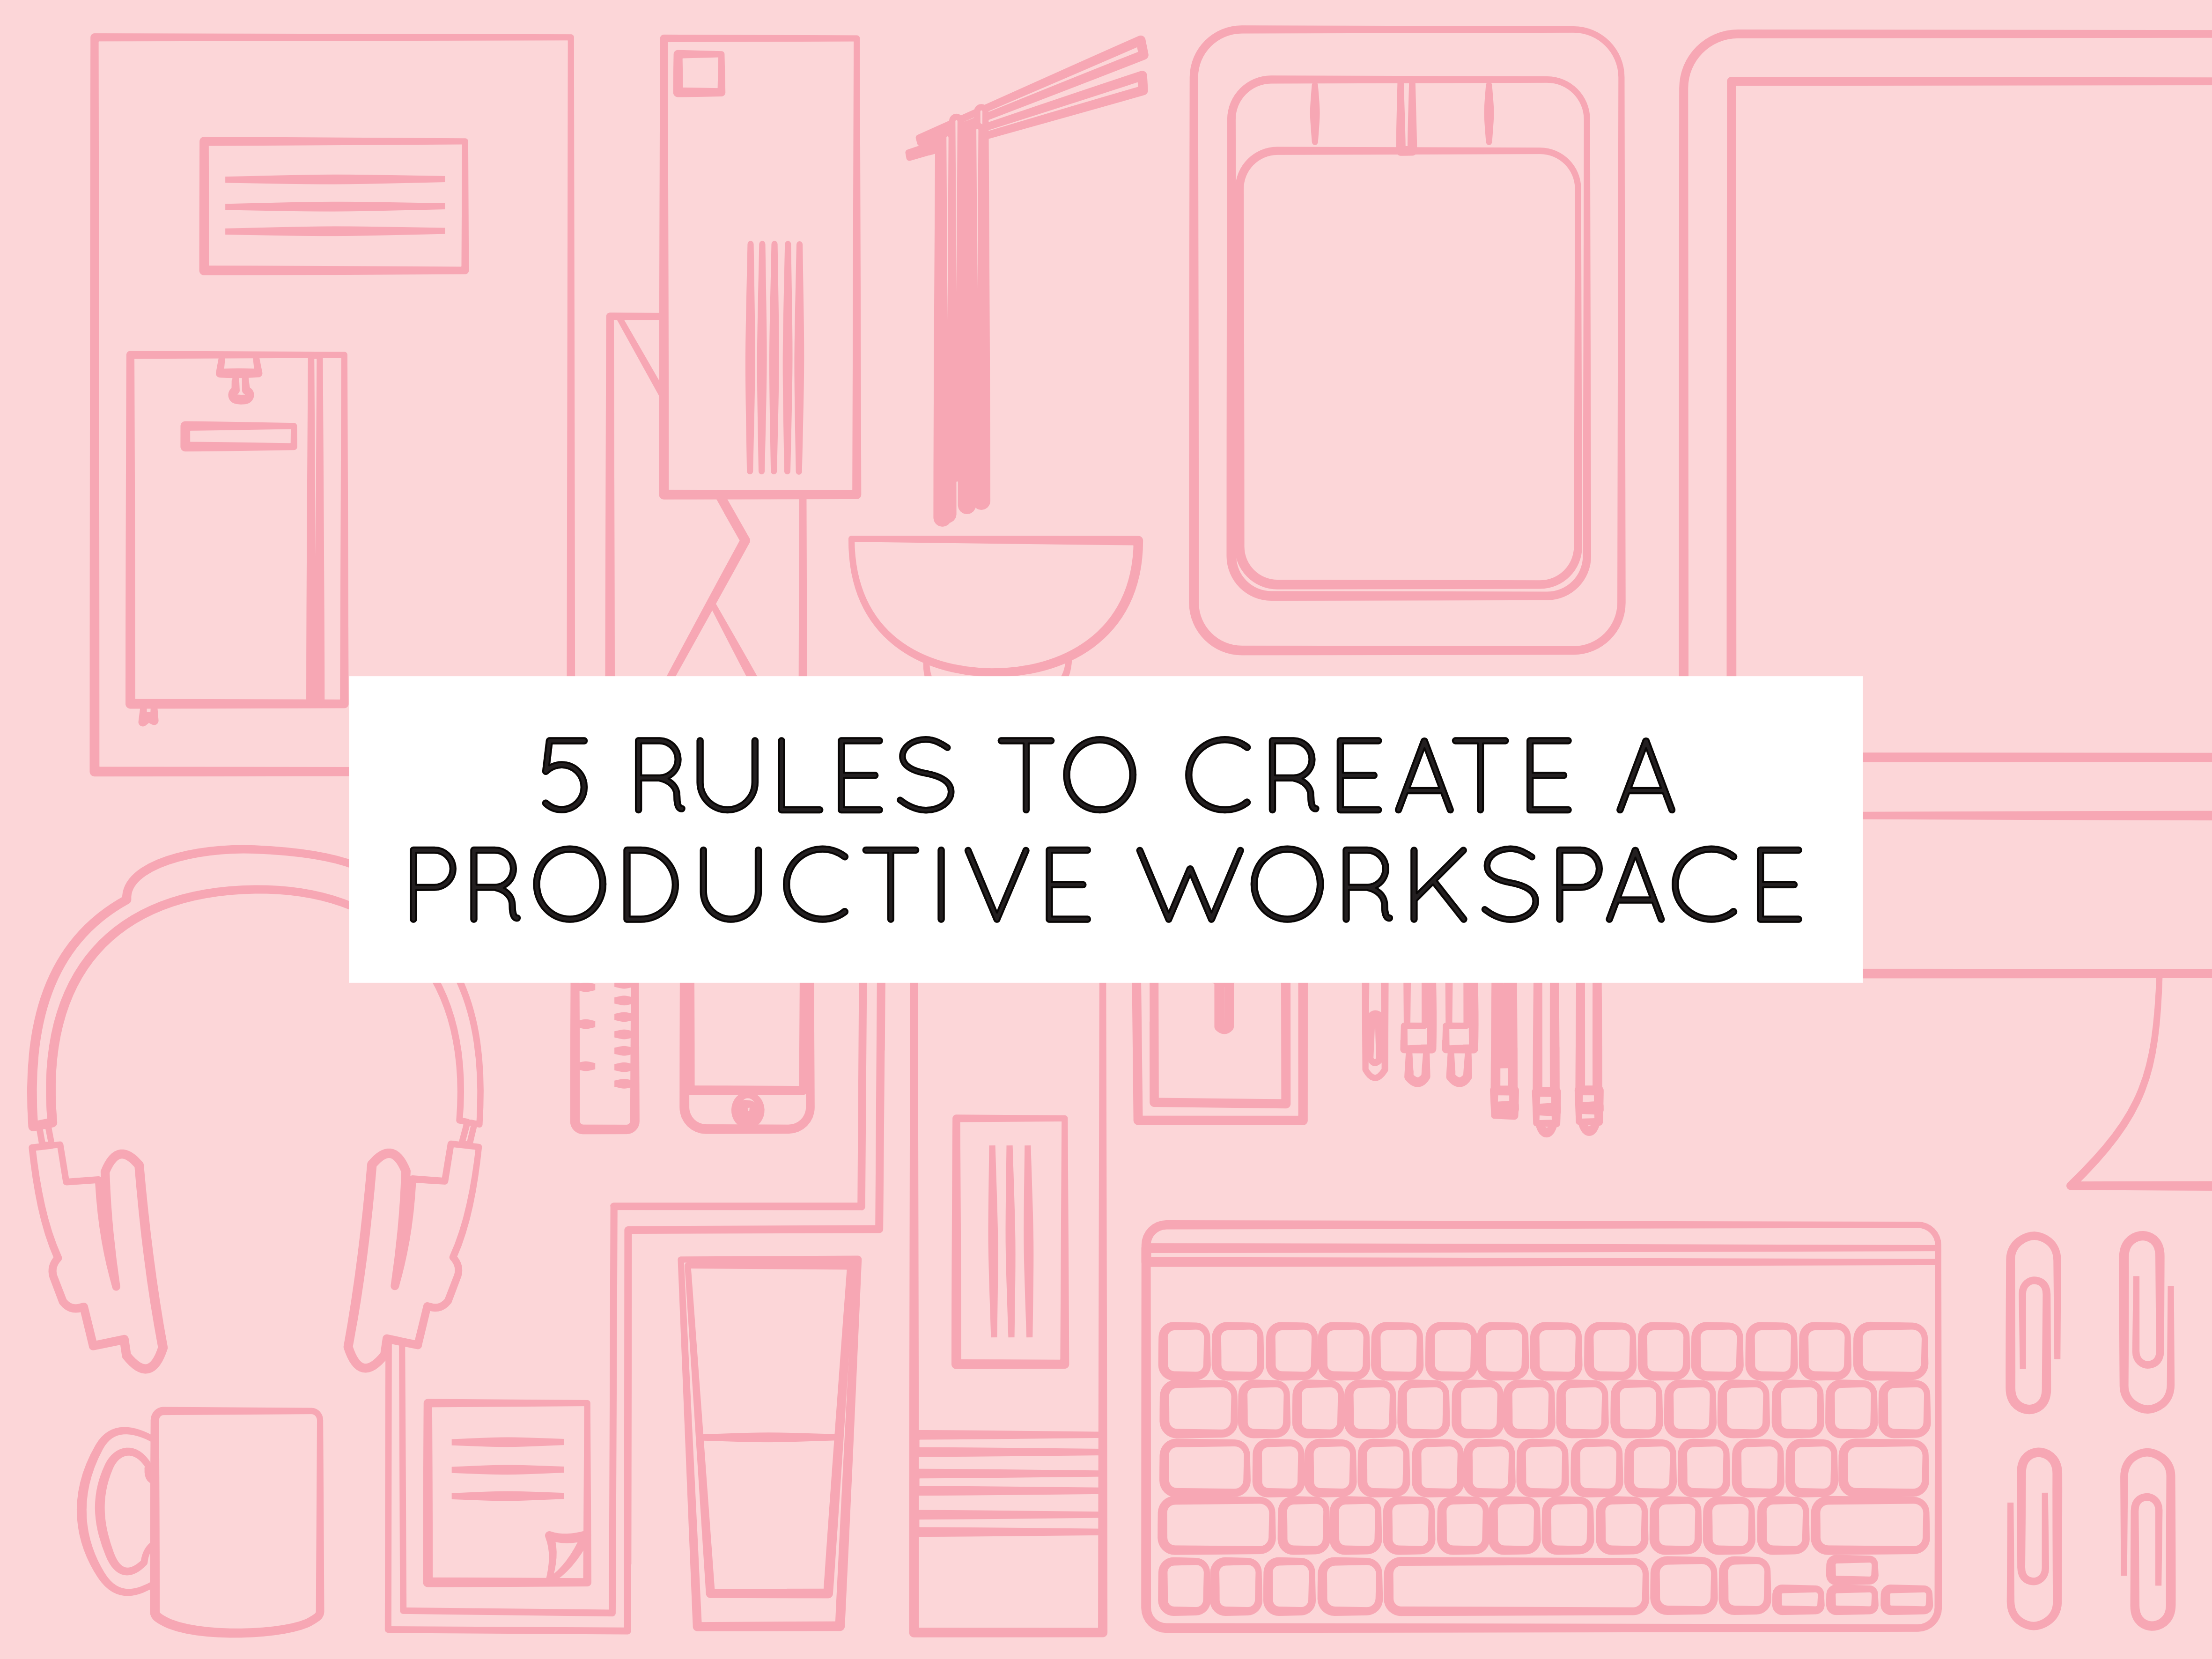 5 rules for creating a creative productive workspace